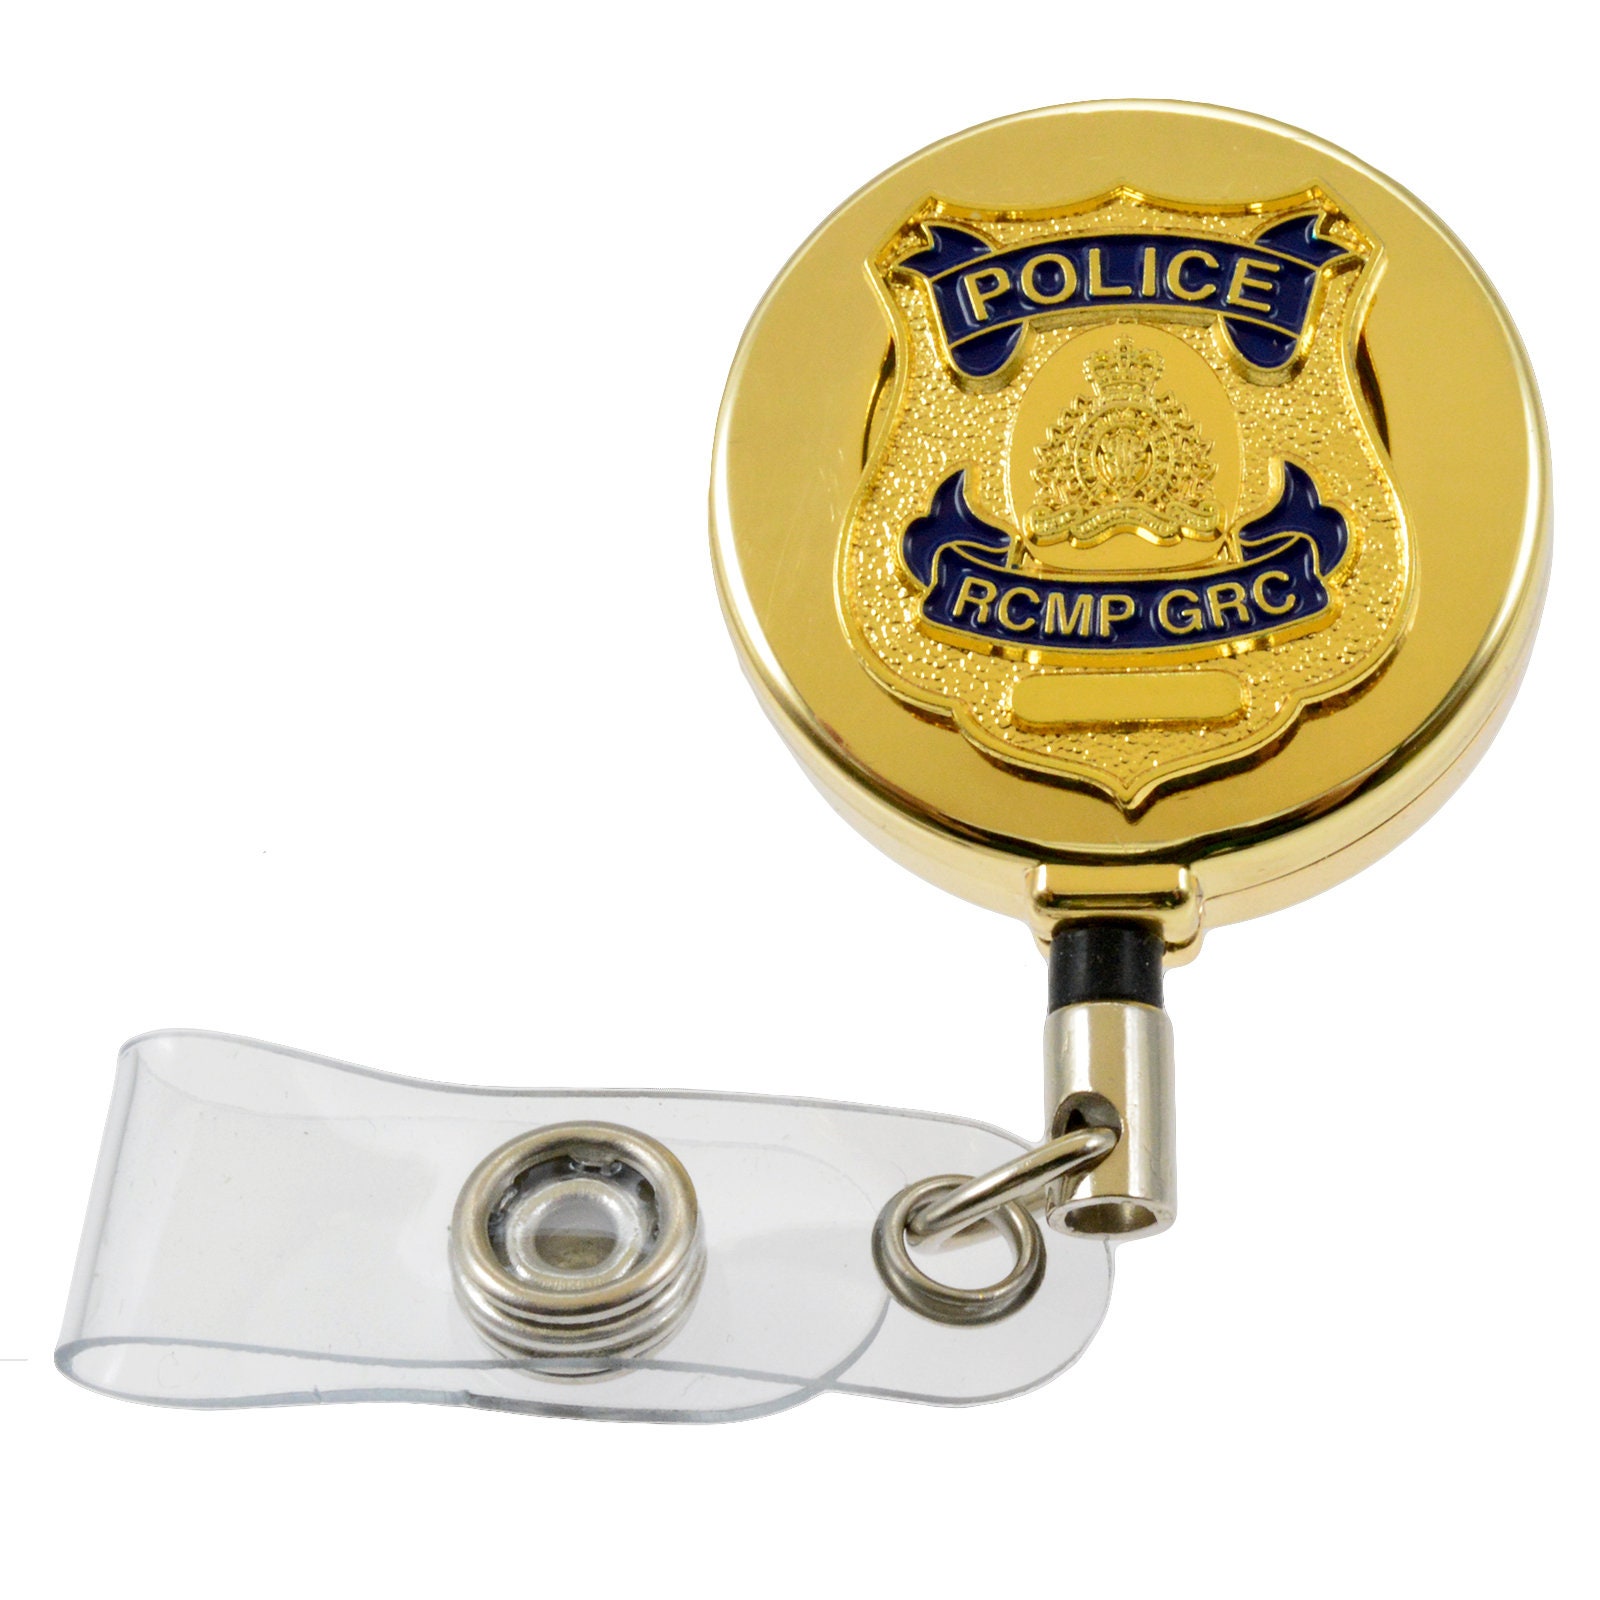 Rcmp GRC Royal Canadian Mounted Police Badge Retractable Security ID Card Holder Reel